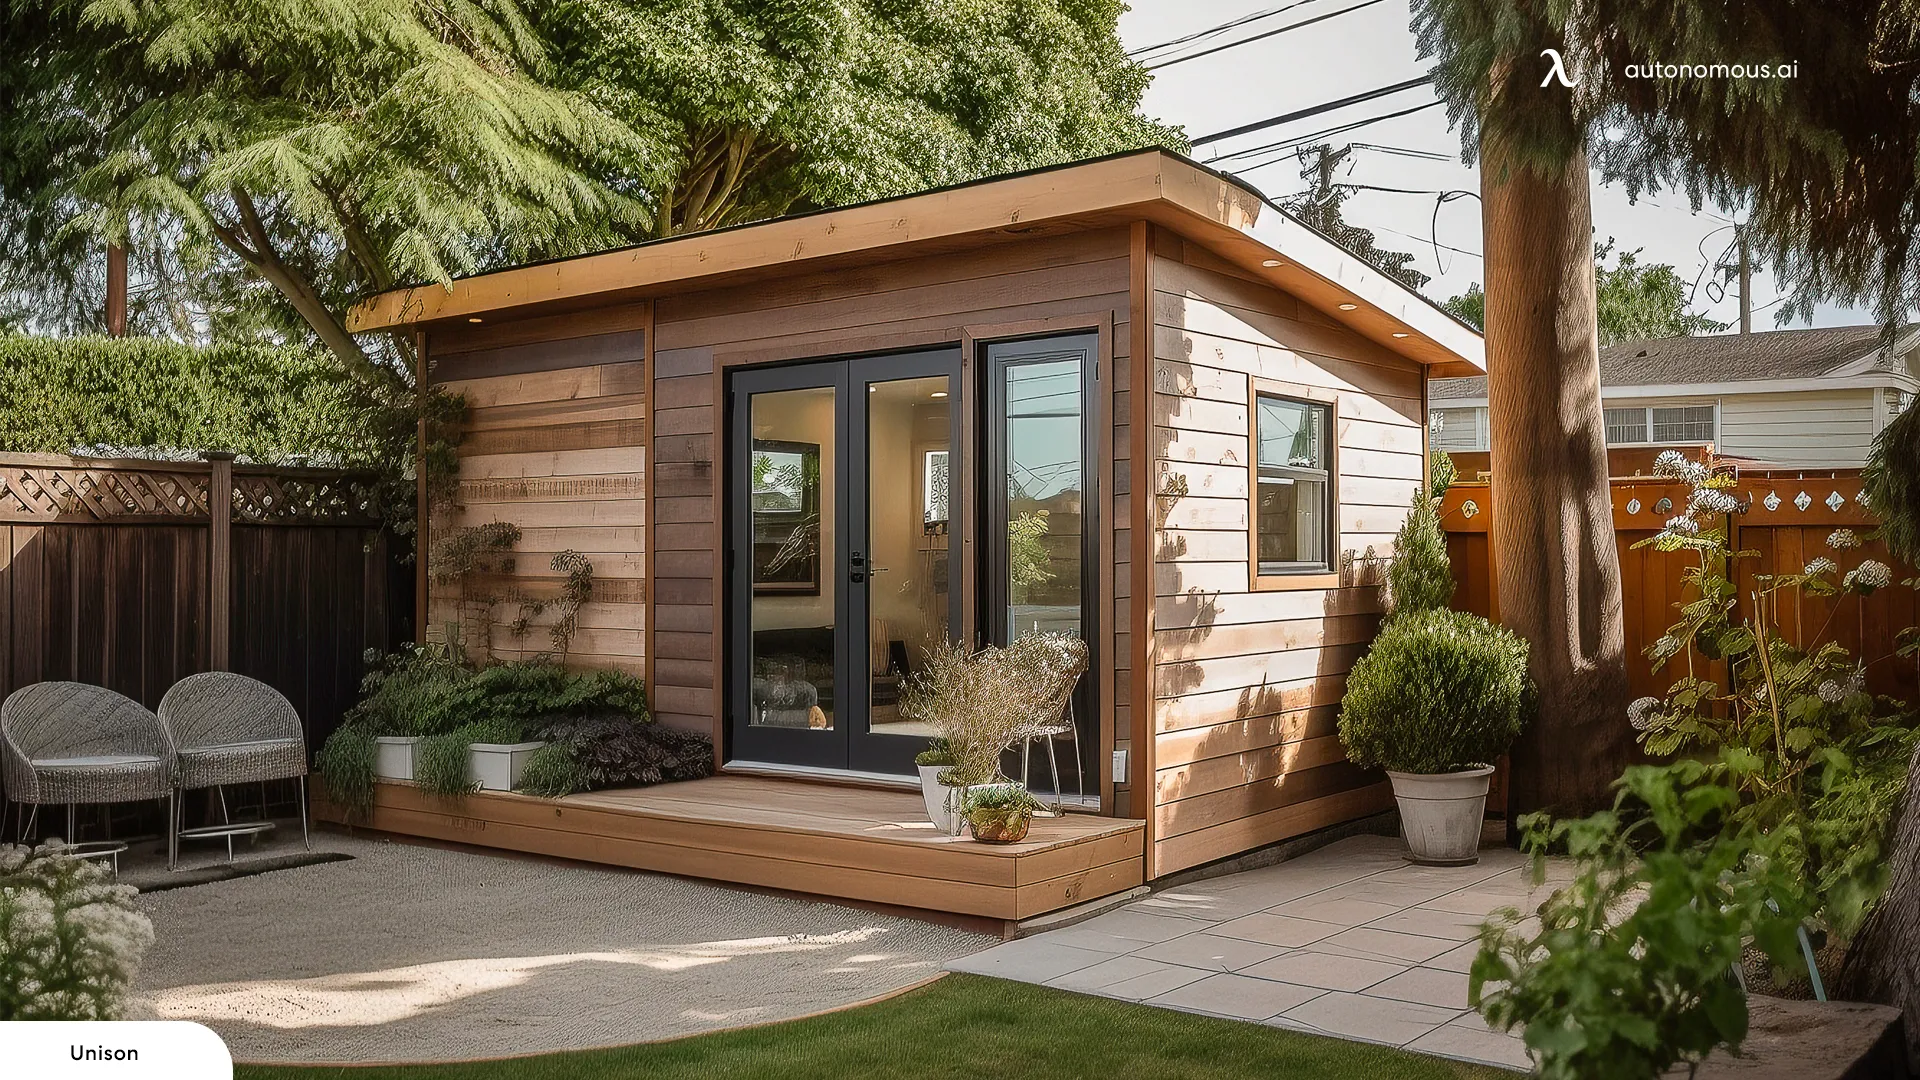 Prefab ADUs in San Jose: Meeting Requirements and Obtaining Permits